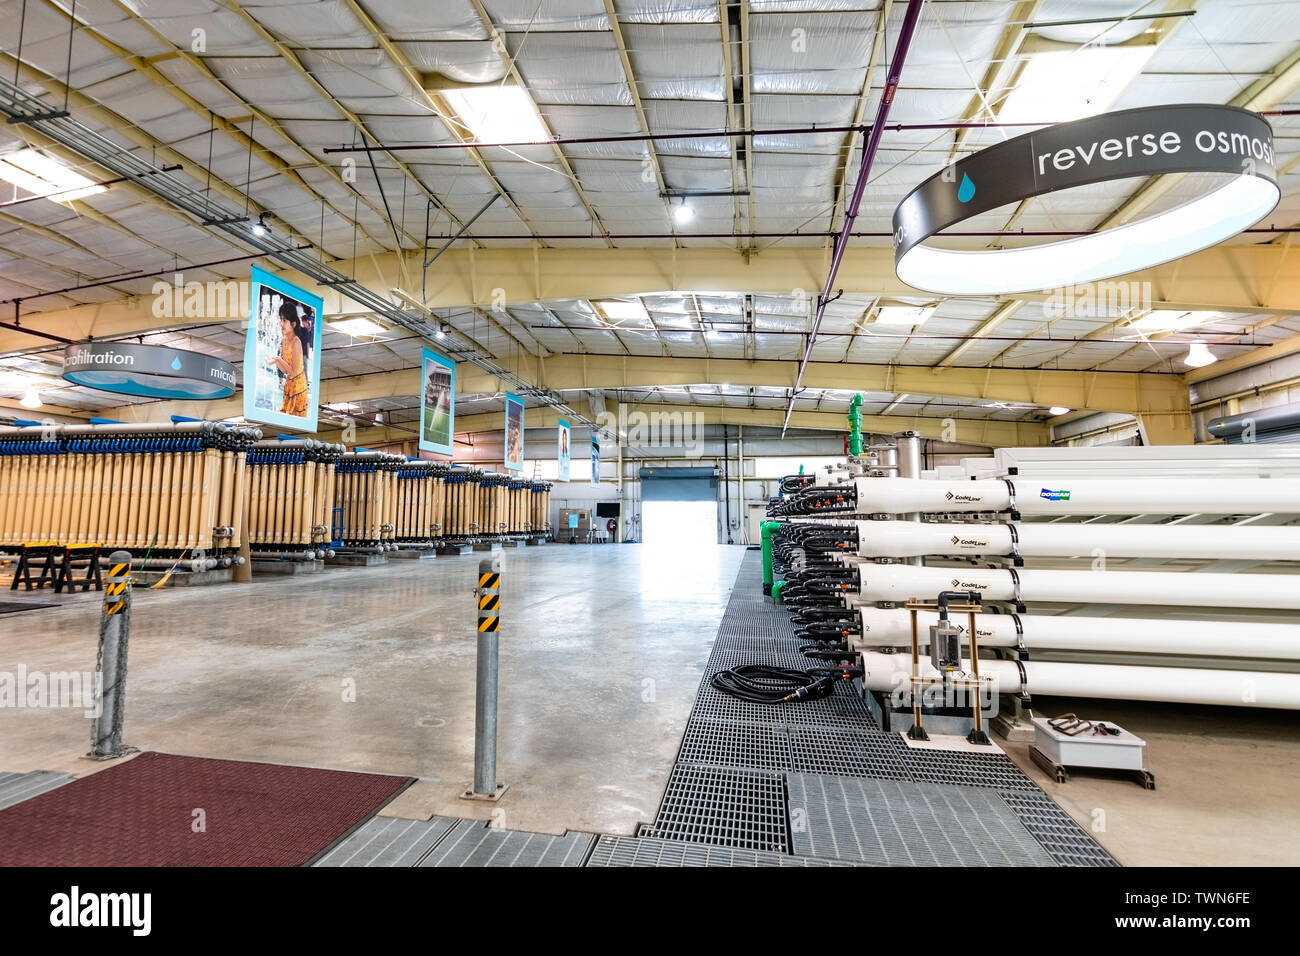 June 20, 2019 San Jose / CA / USA - Silicon Valley Advanced Water Purification Center located in South San Francisco bay area; part of the Santa Clara Stock Photo